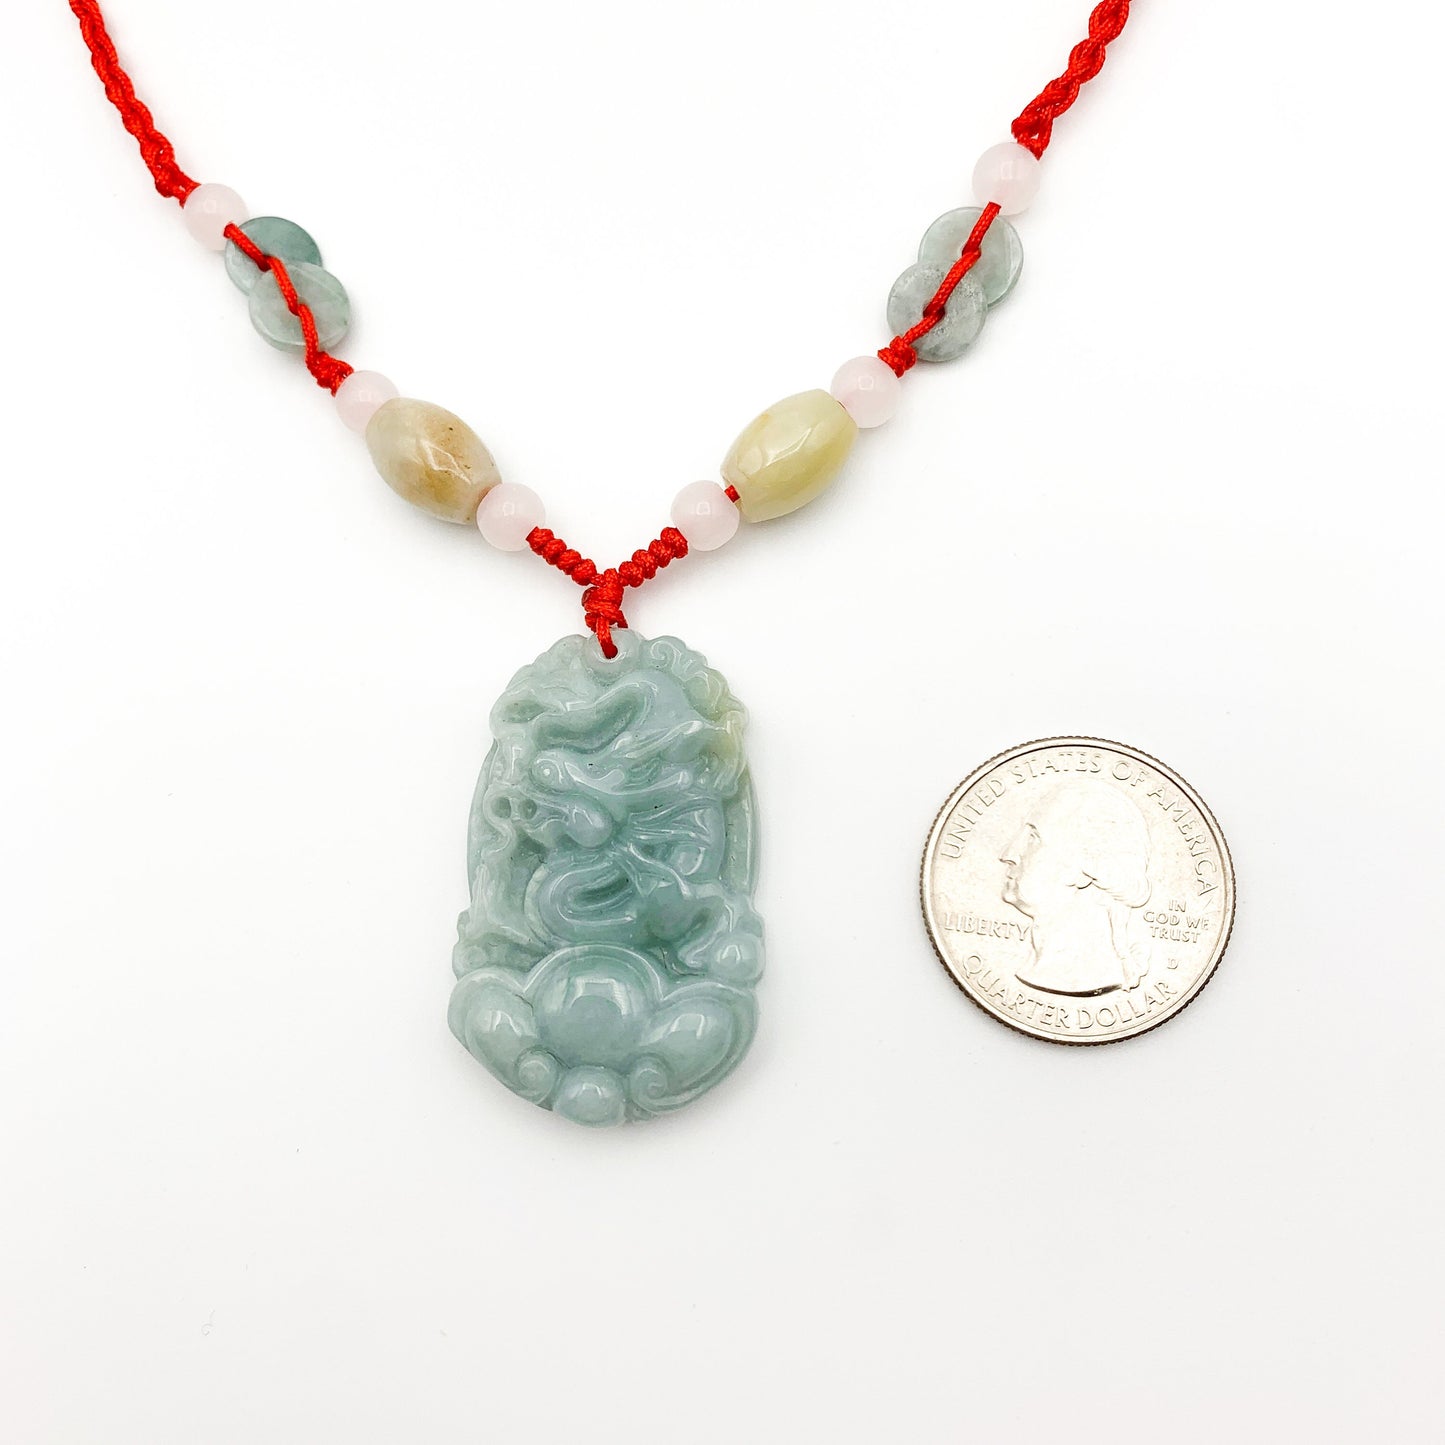 Red Jadeite Jade Dragon Chinese Zodiac Carved Pendant Necklace, YW-0110-1646195123 - AriaDesignCollection